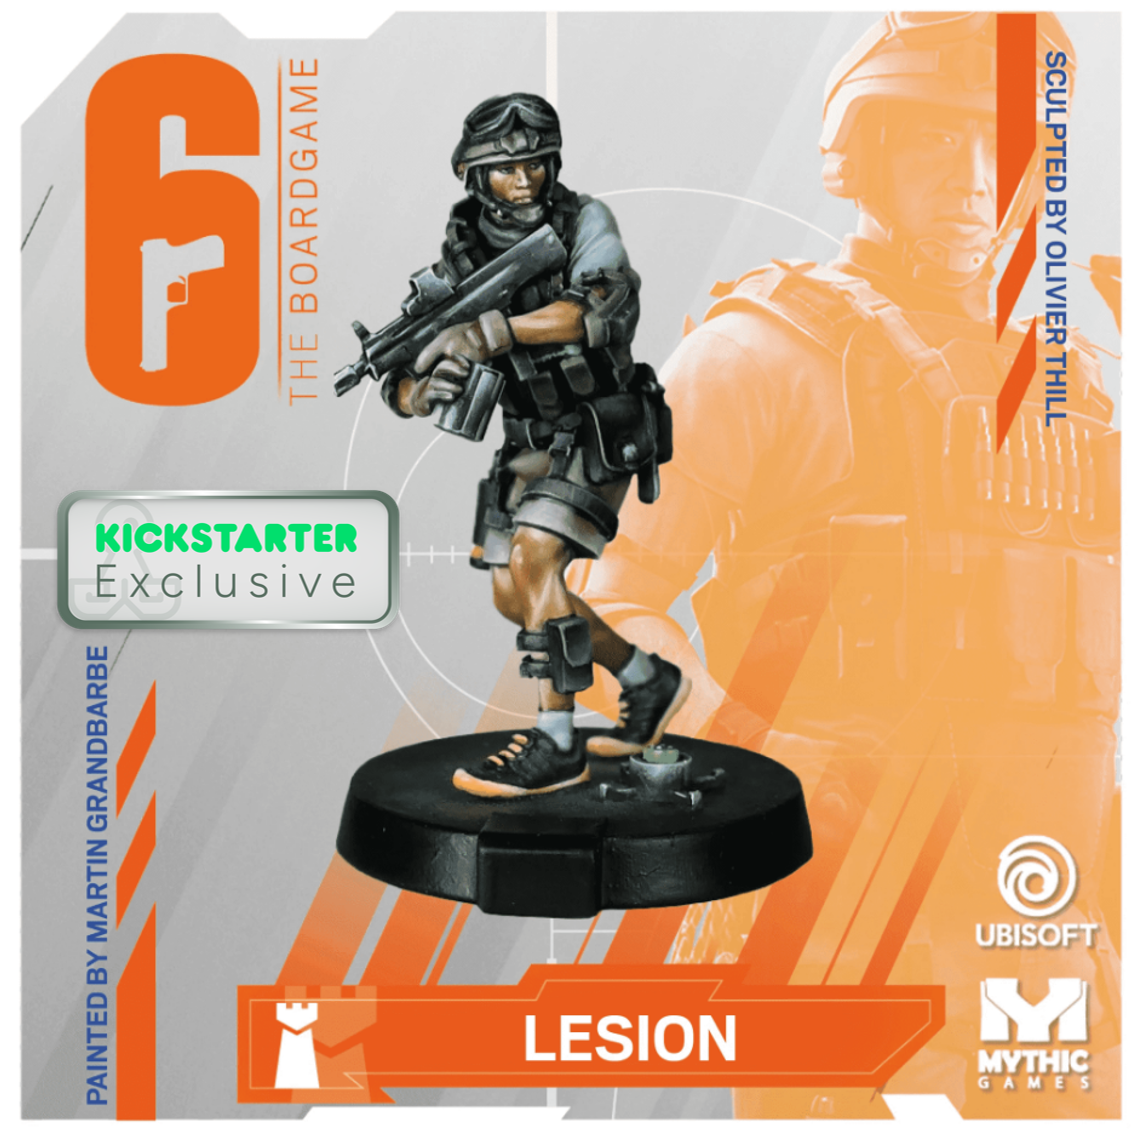 Kickstarter Exclusive Year 2 Expansion, Lesion Miniature, From 6: Siege - The Board Game